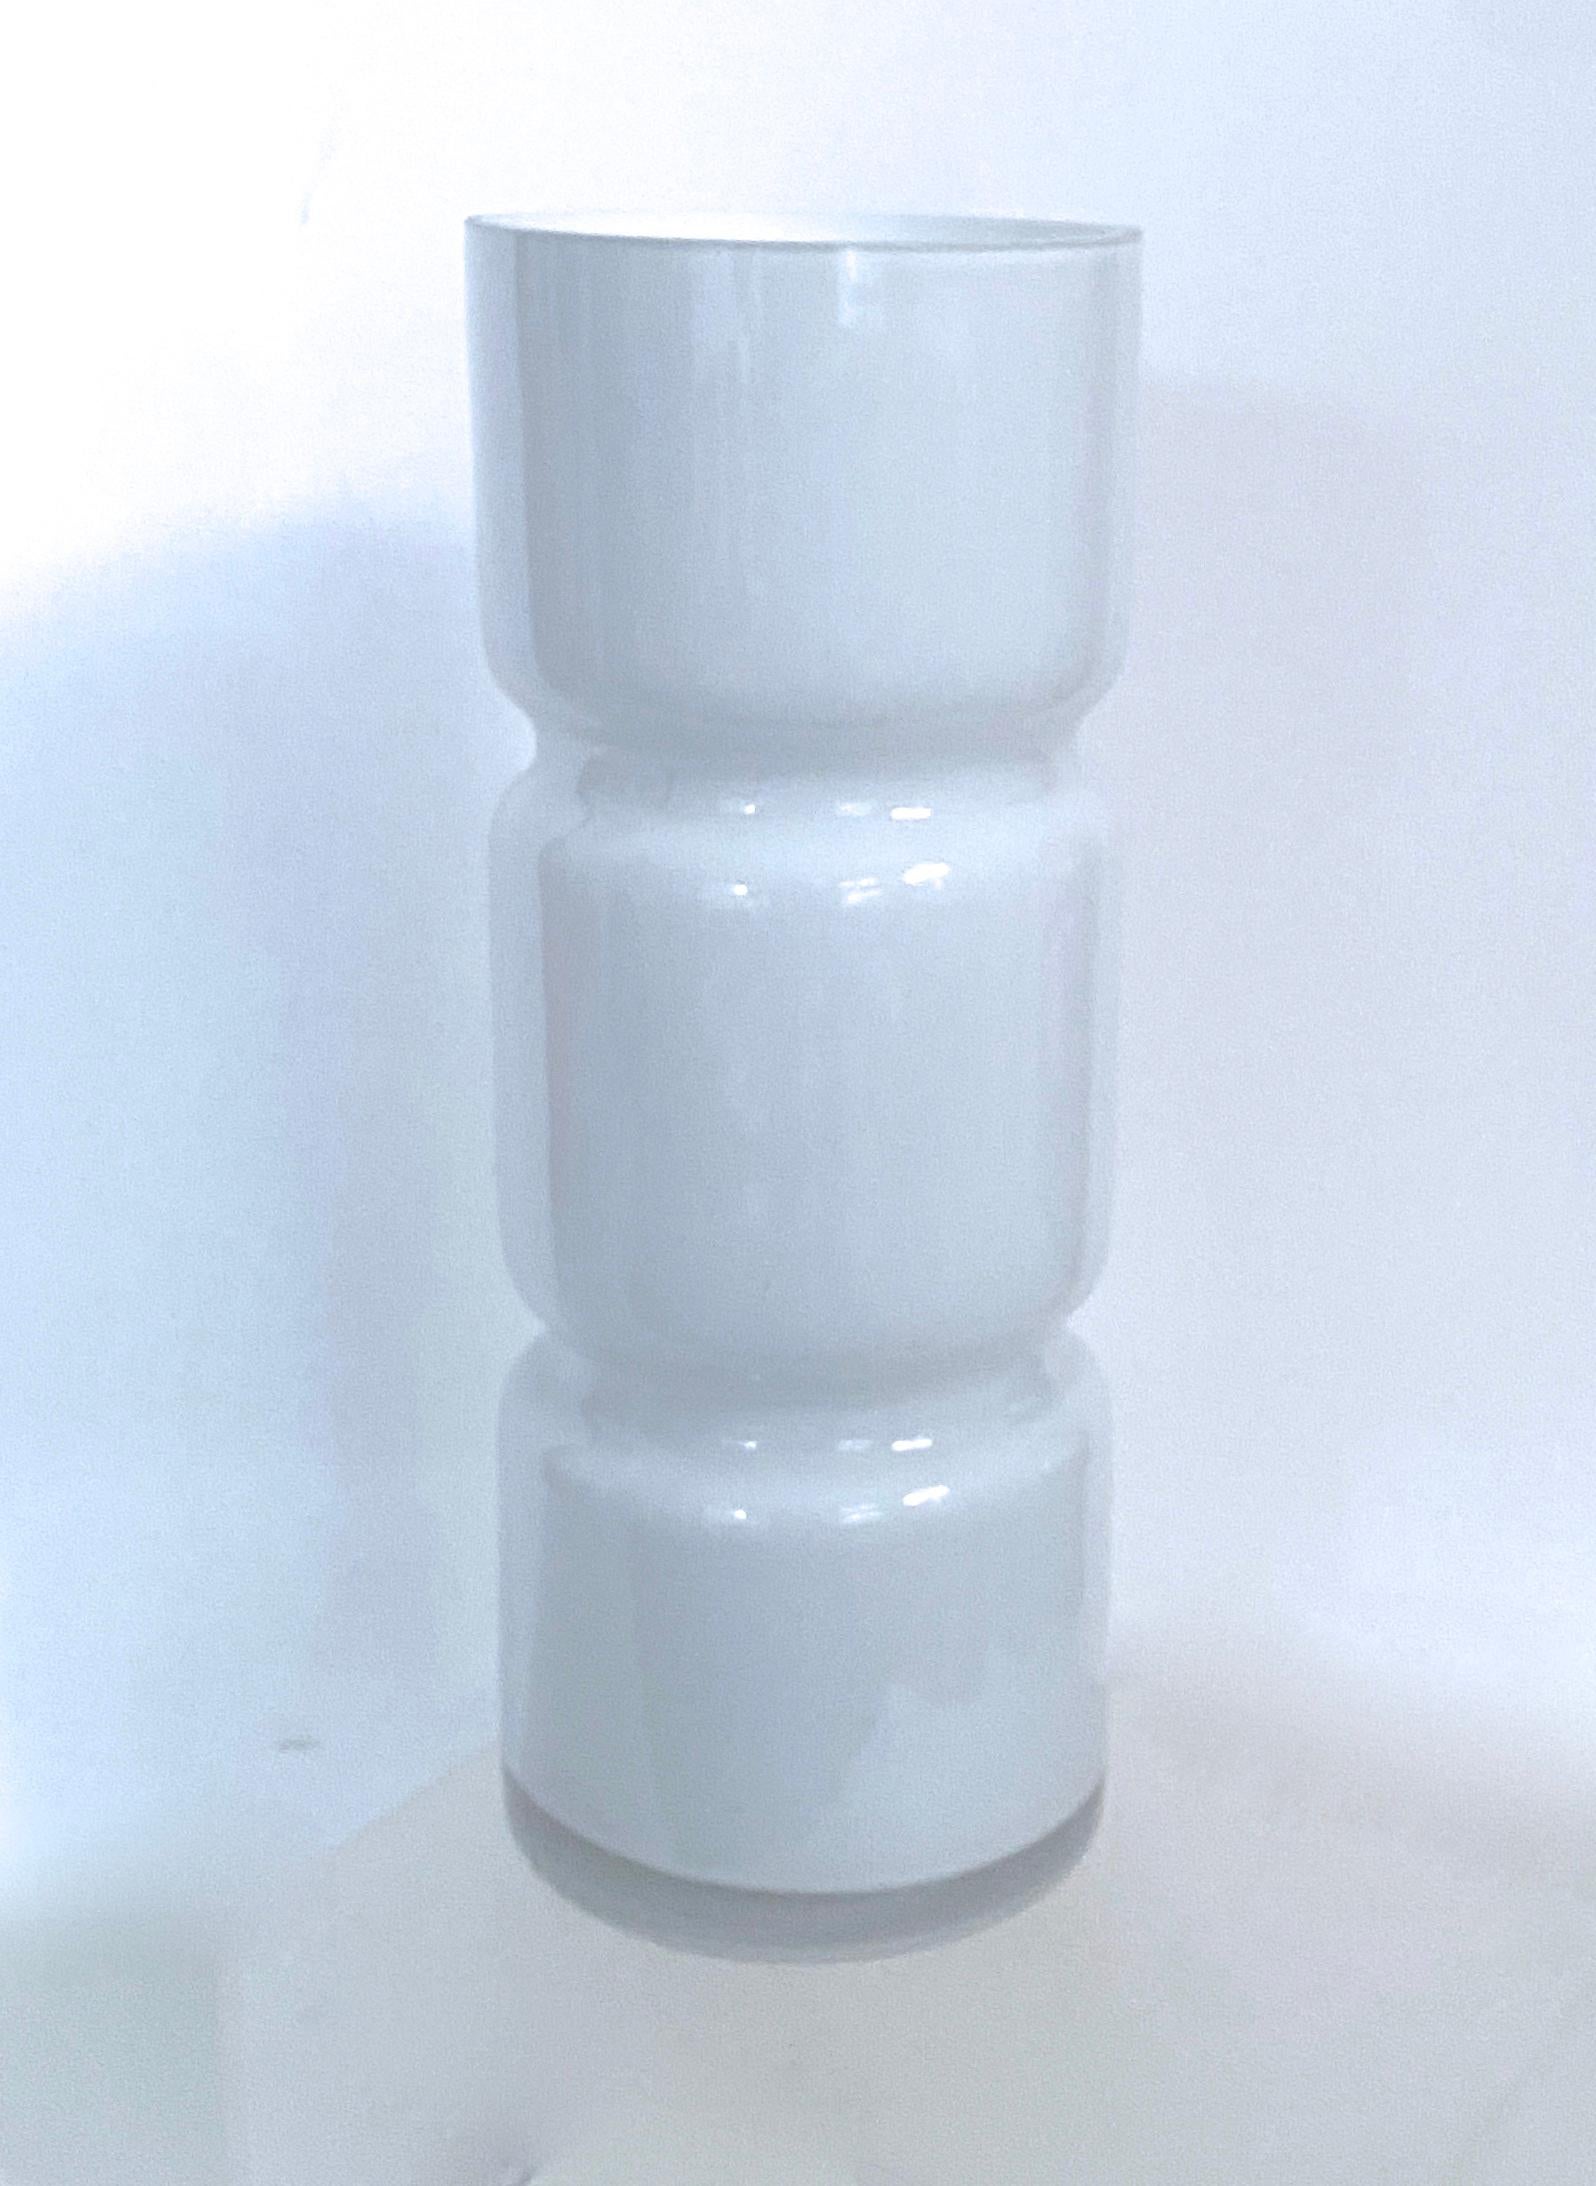 Two Modernist Scandinavian/Murano Space Age White Glass Vases from Late 1960s For Sale 2